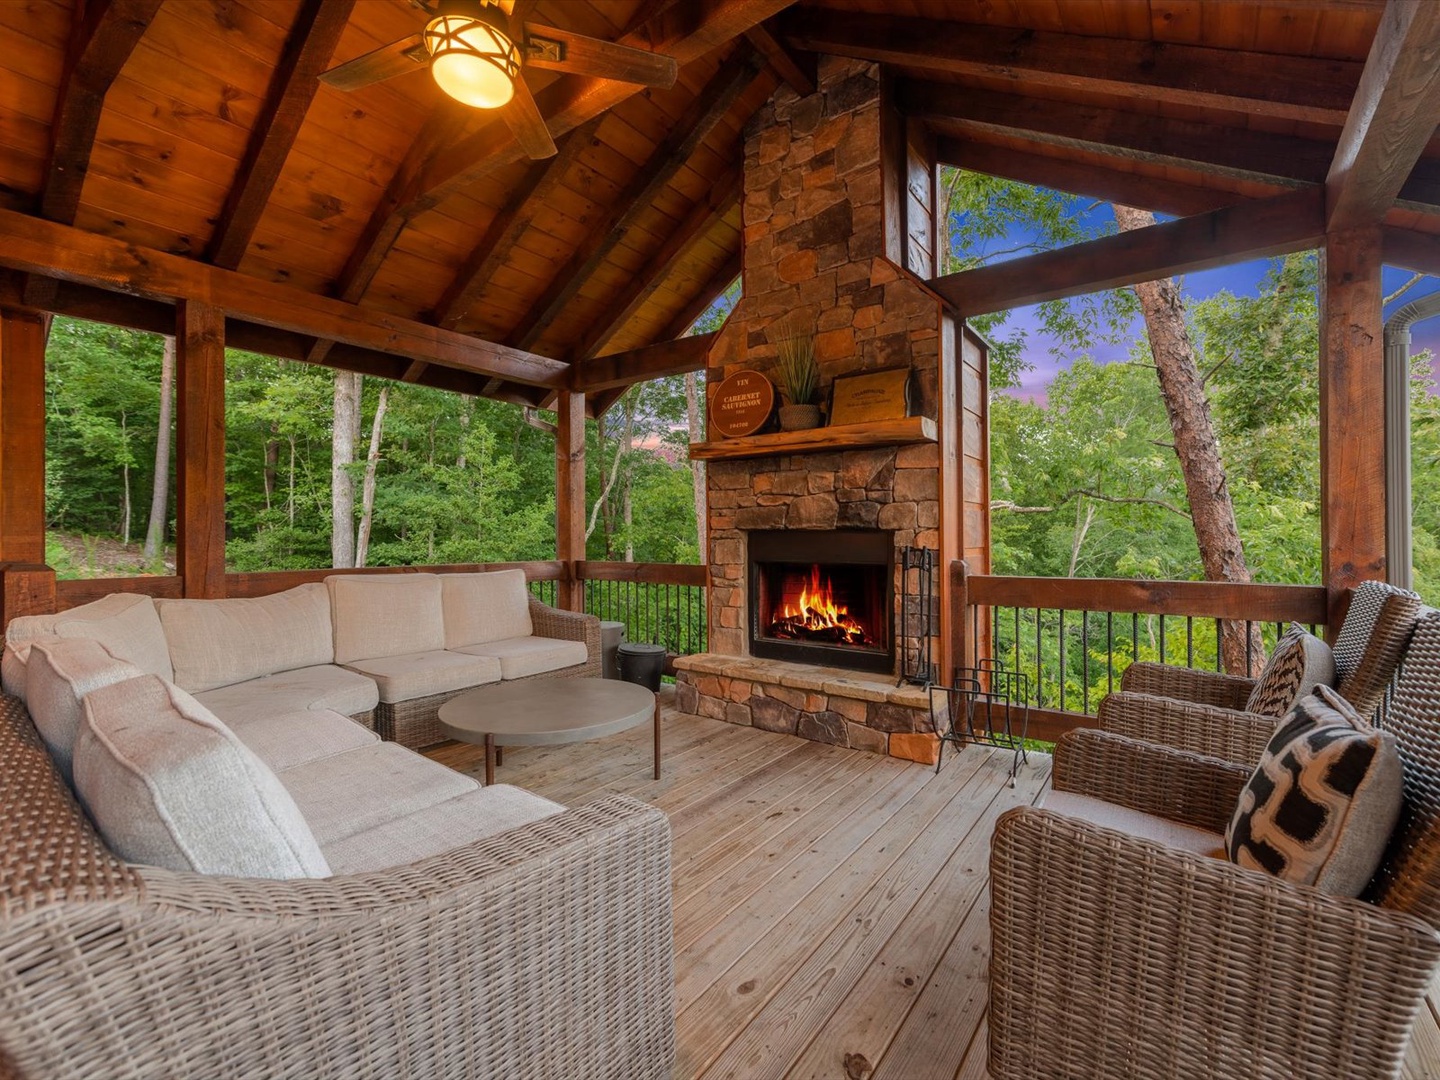 Whisky Creek Retreat- Entry deck fireplace with lounge furniture